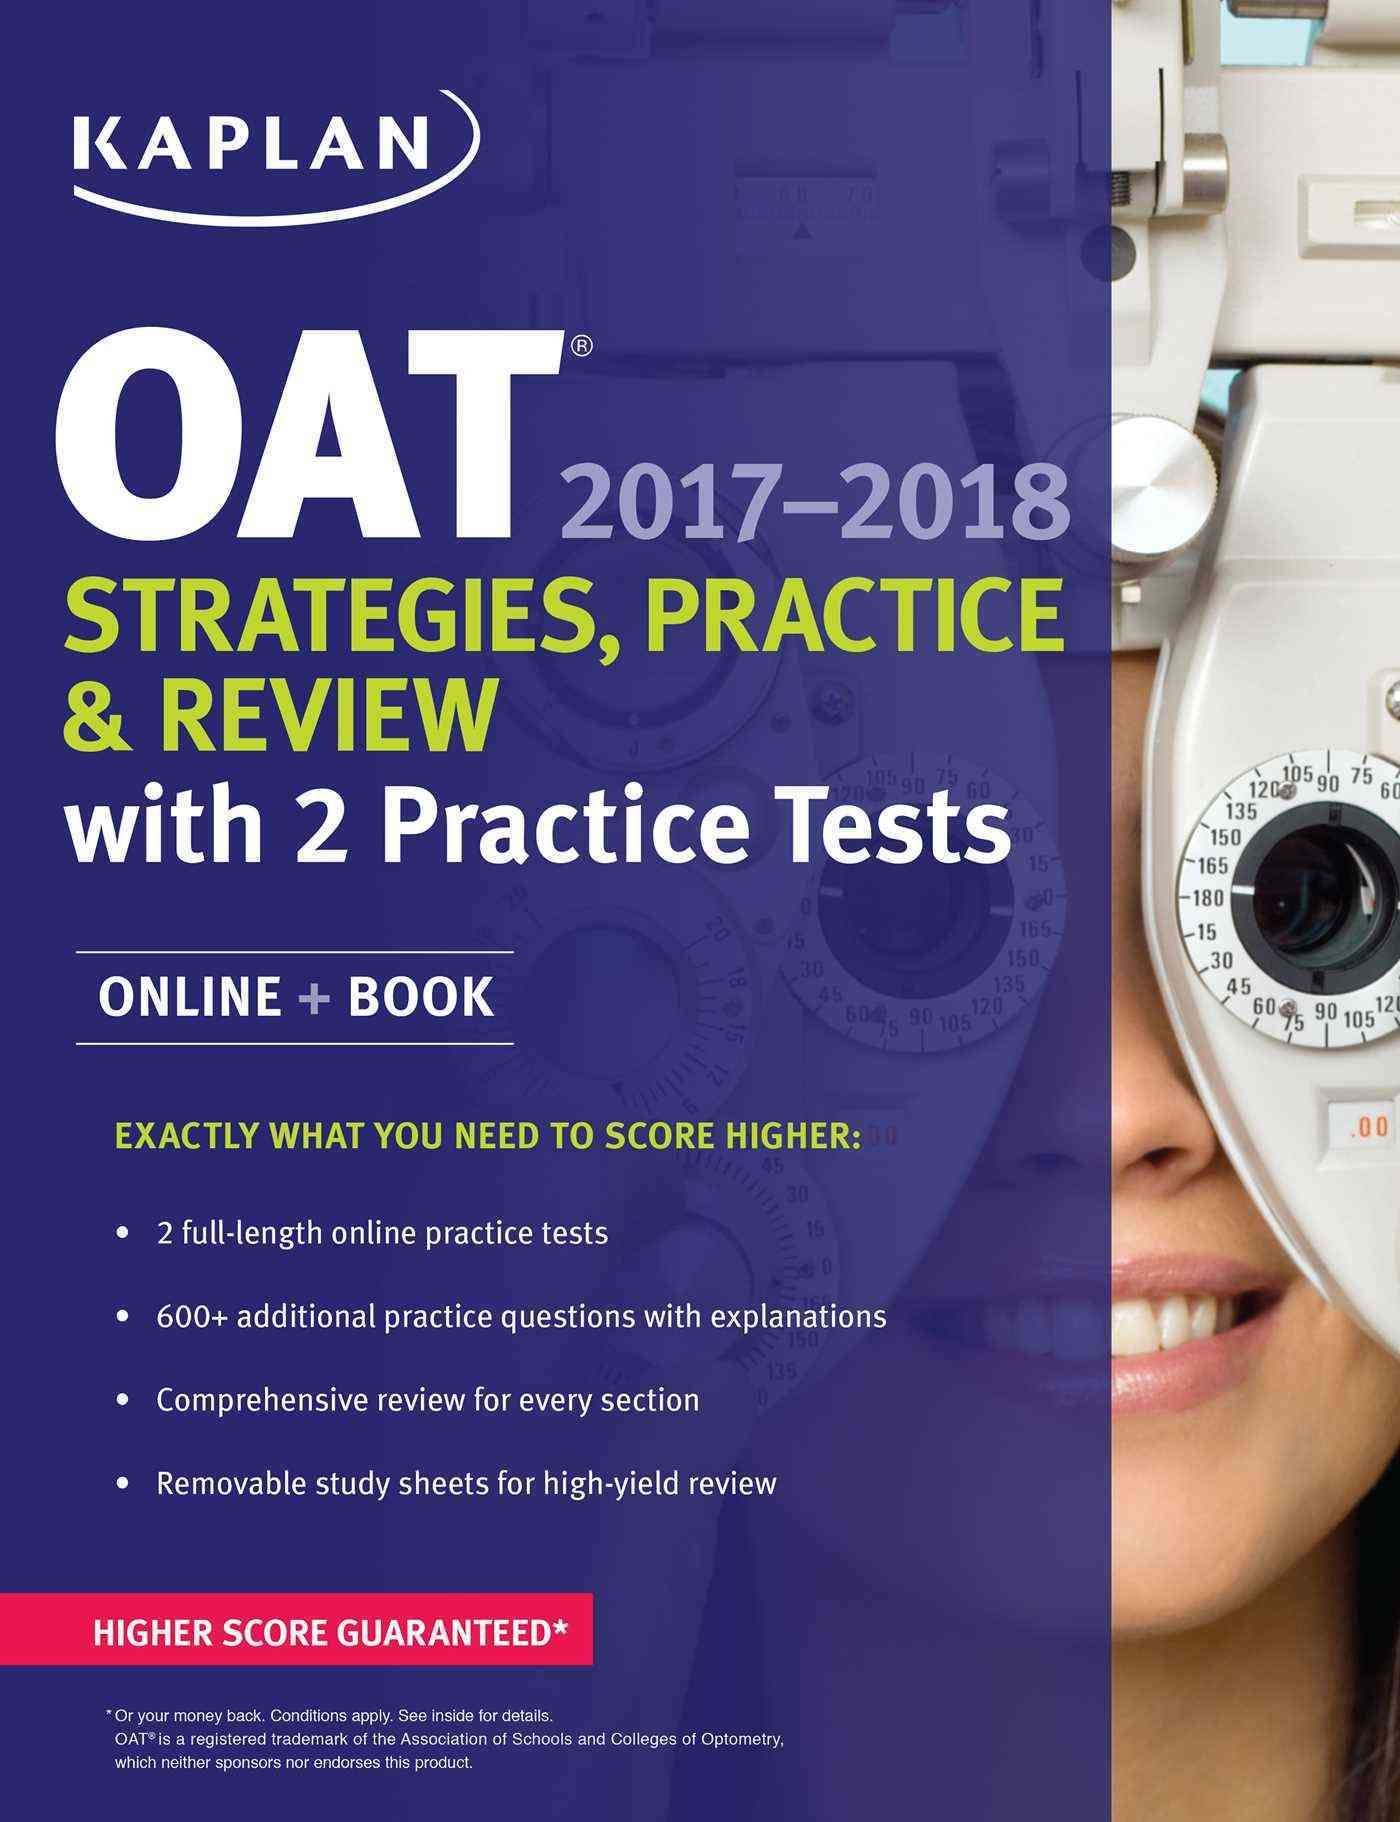 OAT 2017-2018 Strategies, Practice & Review with 2 Practice Tests